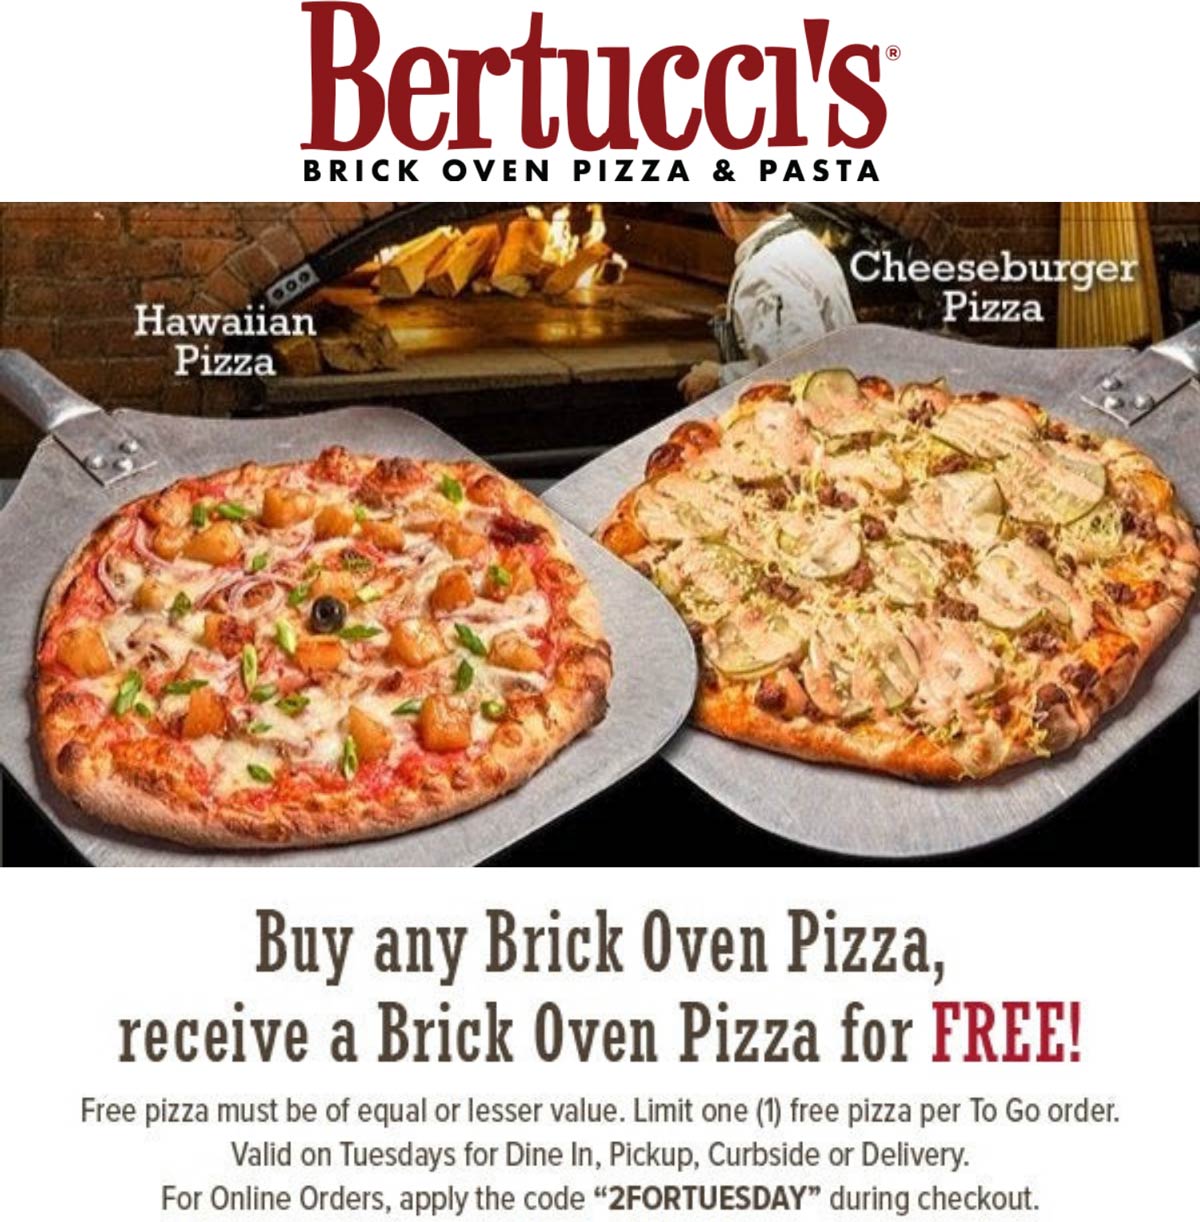 Bertuccis restaurants Coupon  Second pizza free today at Bertuccis via promo code 2FORTUESDAY #bertuccis 